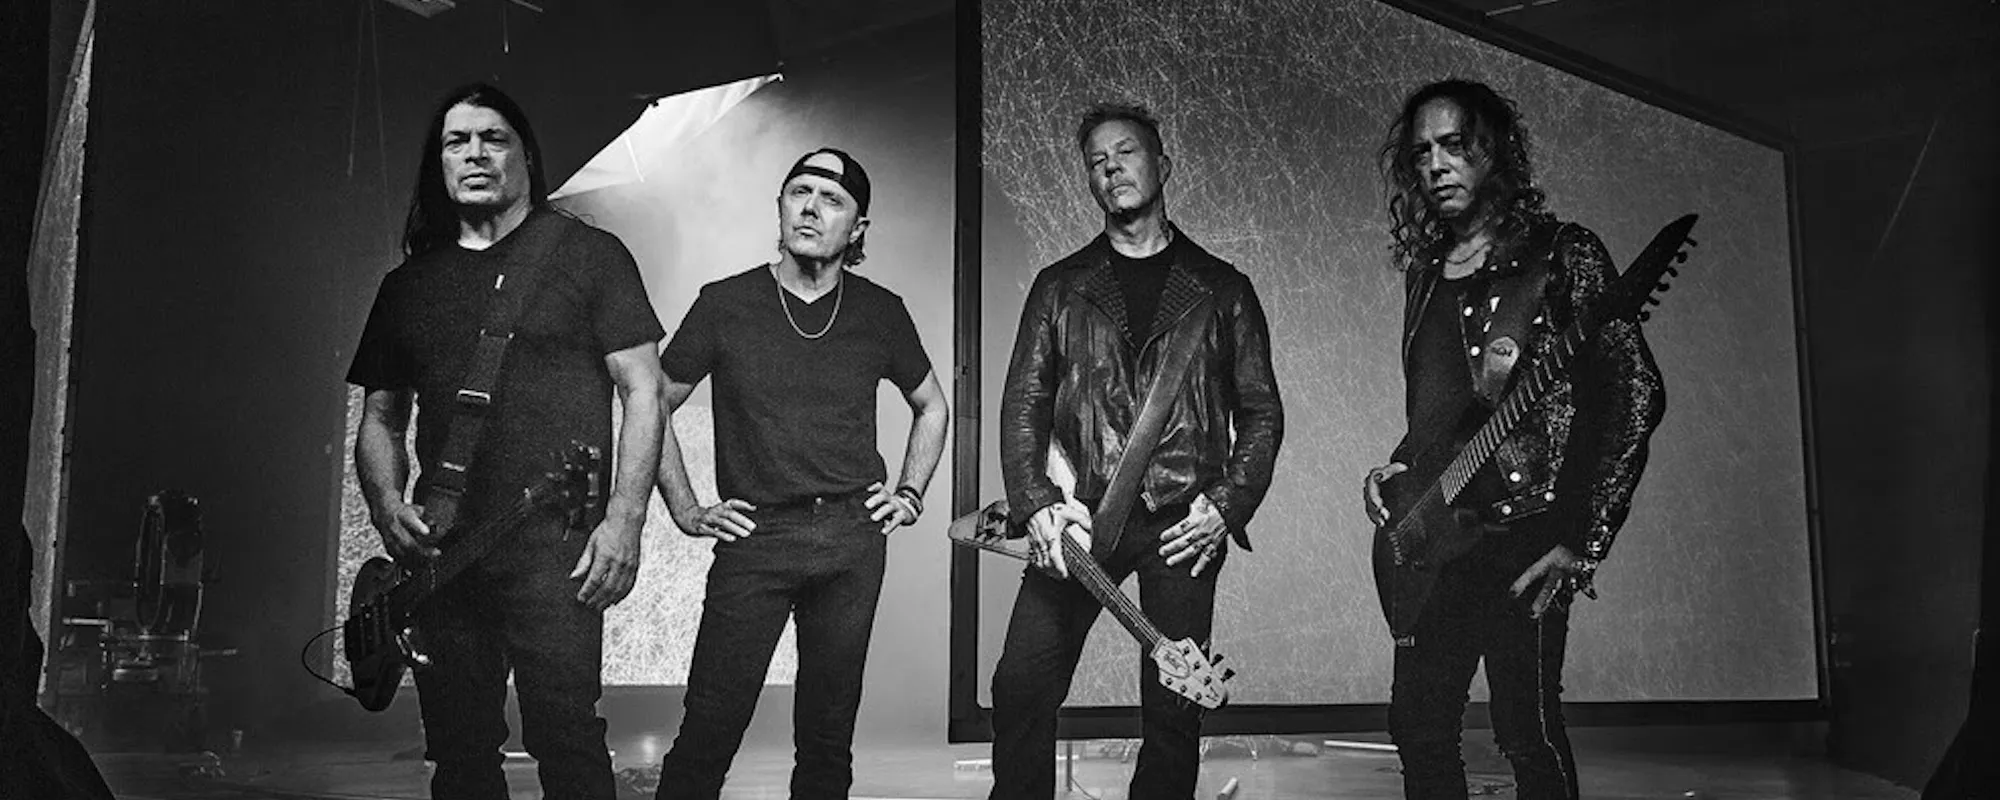 Metallica Unveils Seven-Plus Minute “72 Seasons” with New Video